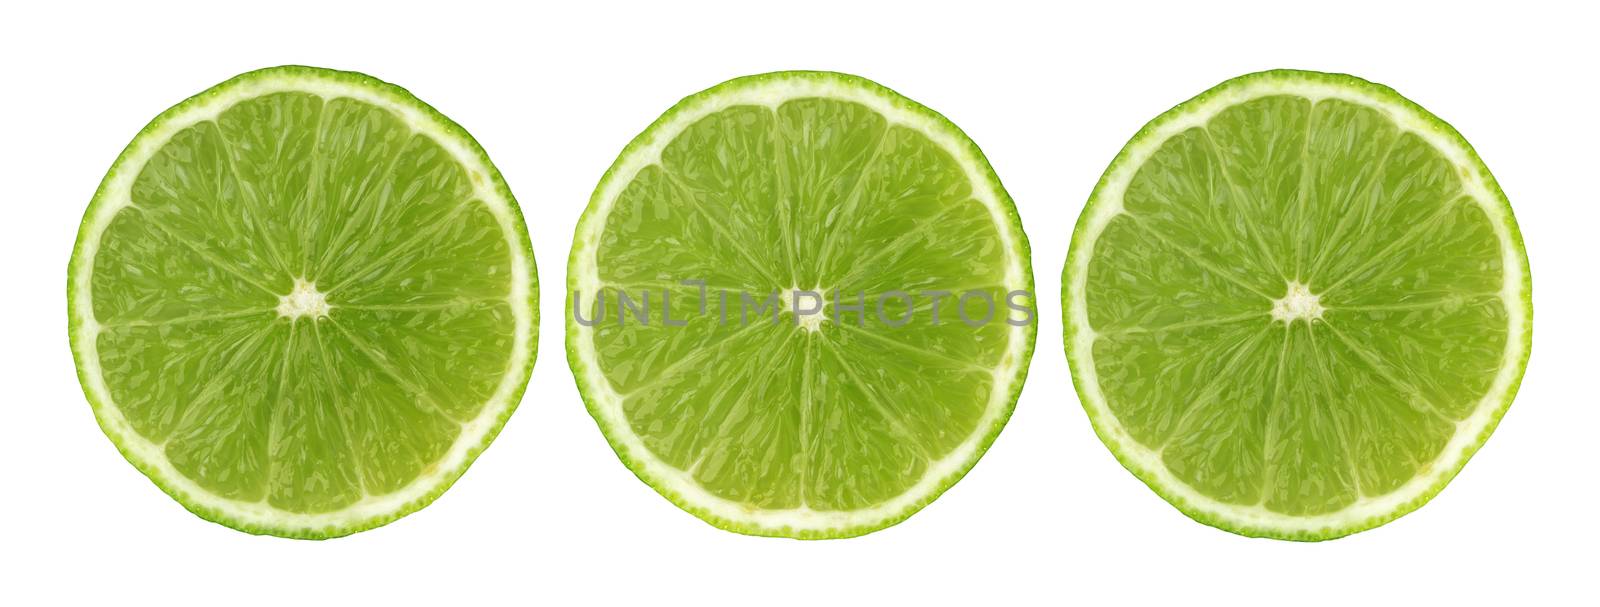 Lime isolated on white background with clipping path. Collection